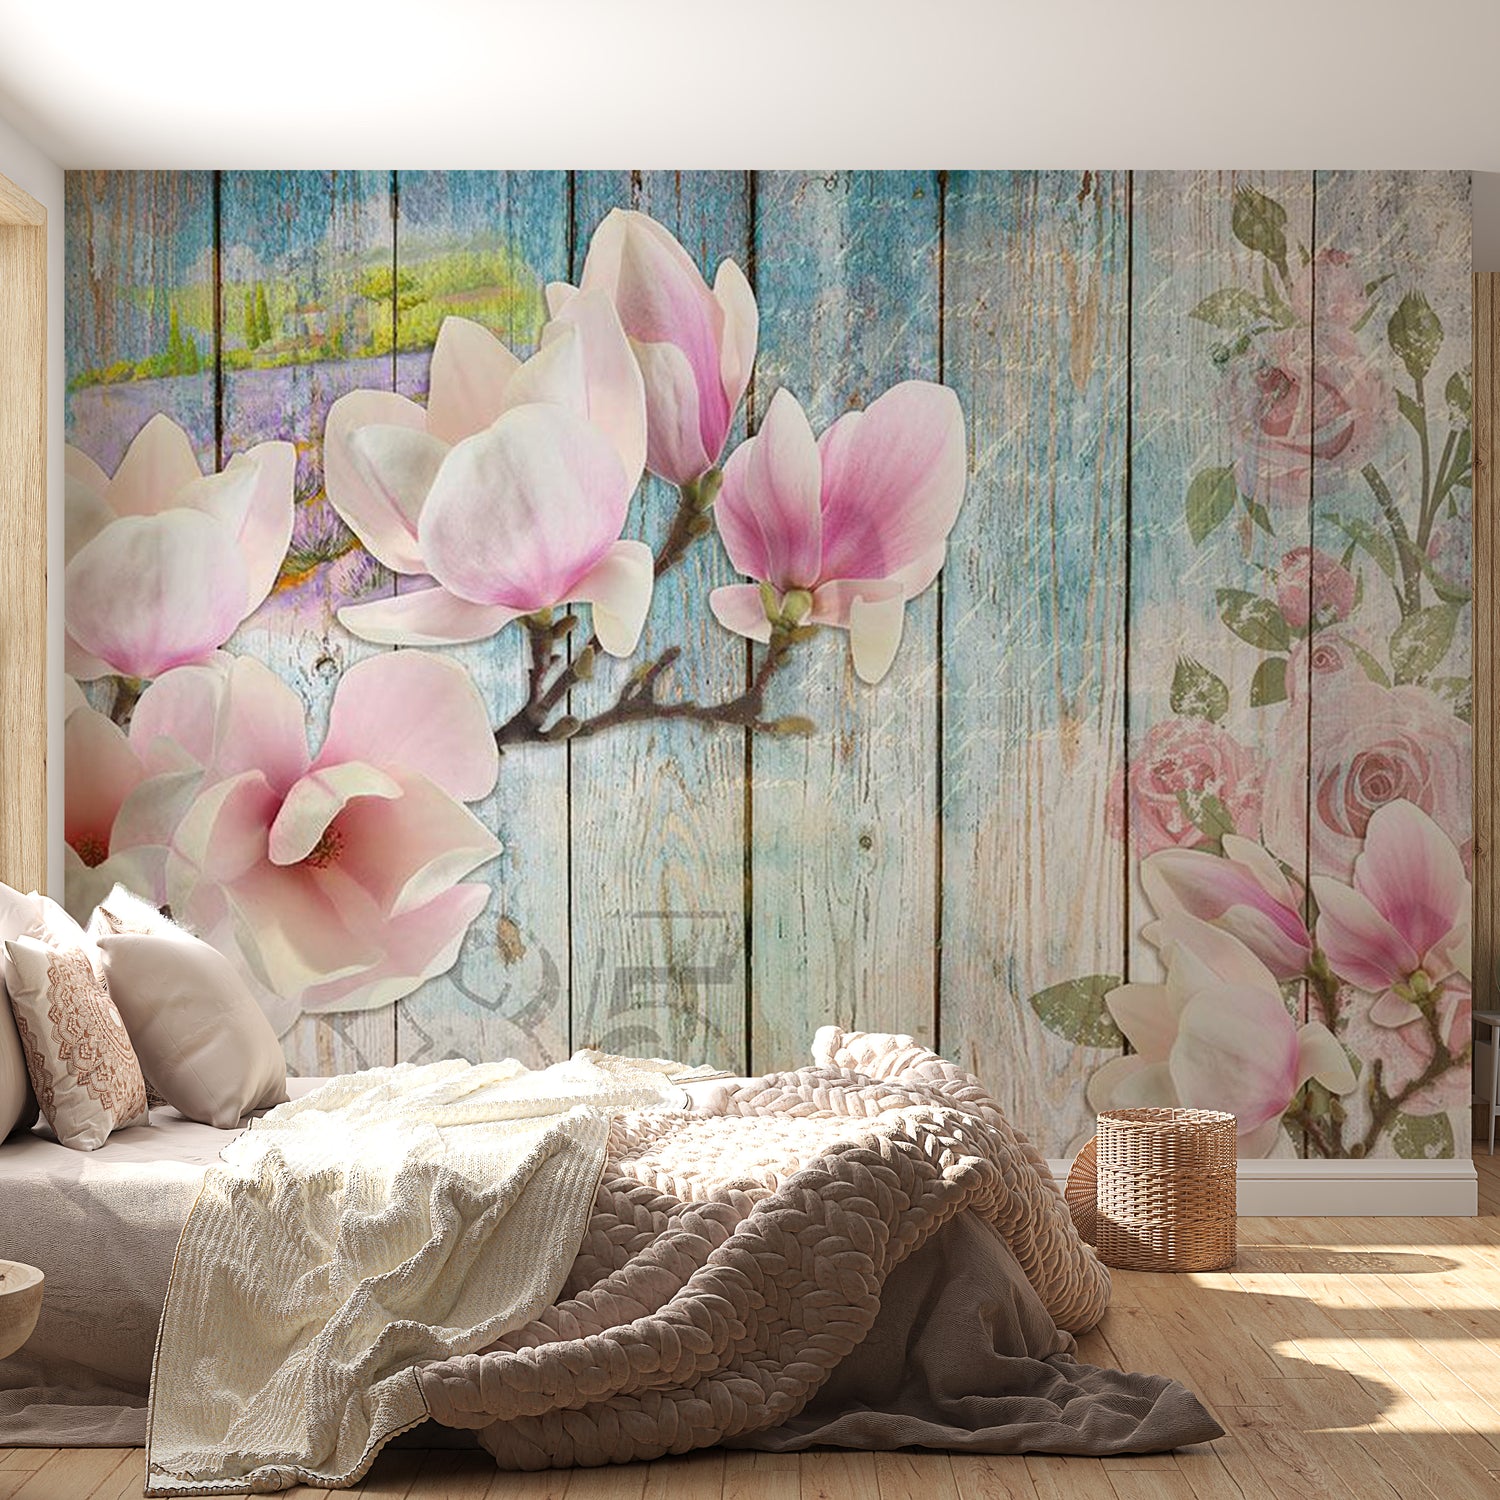 Floral Wallpaper Wall Mural - Pink Flowers On Wood